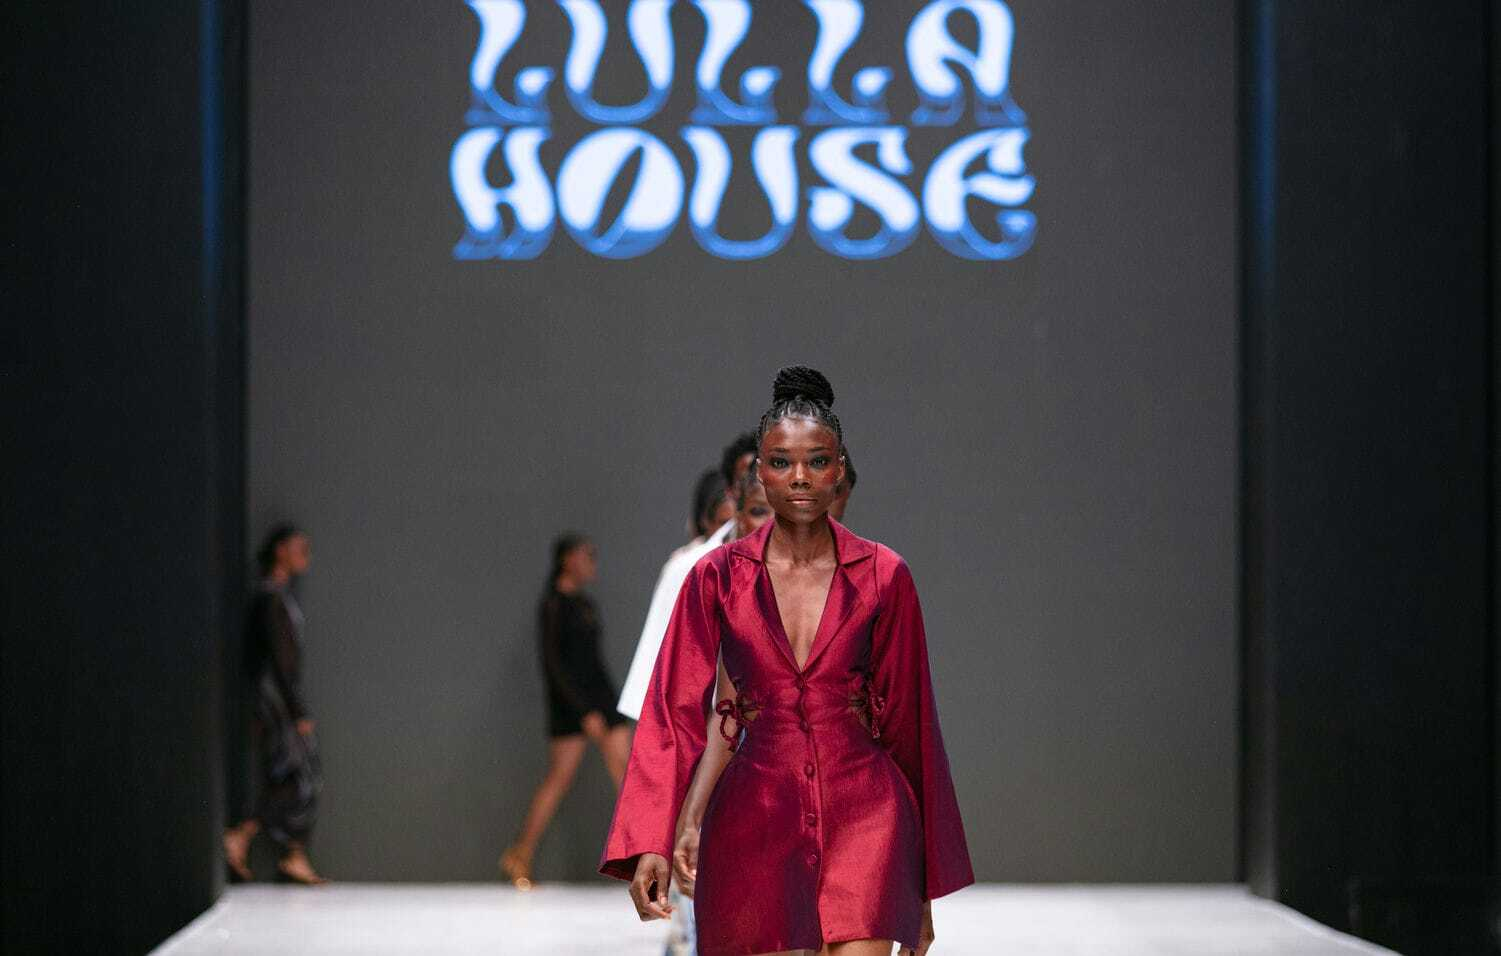 A piece from Lulla House's collection at LFW23    